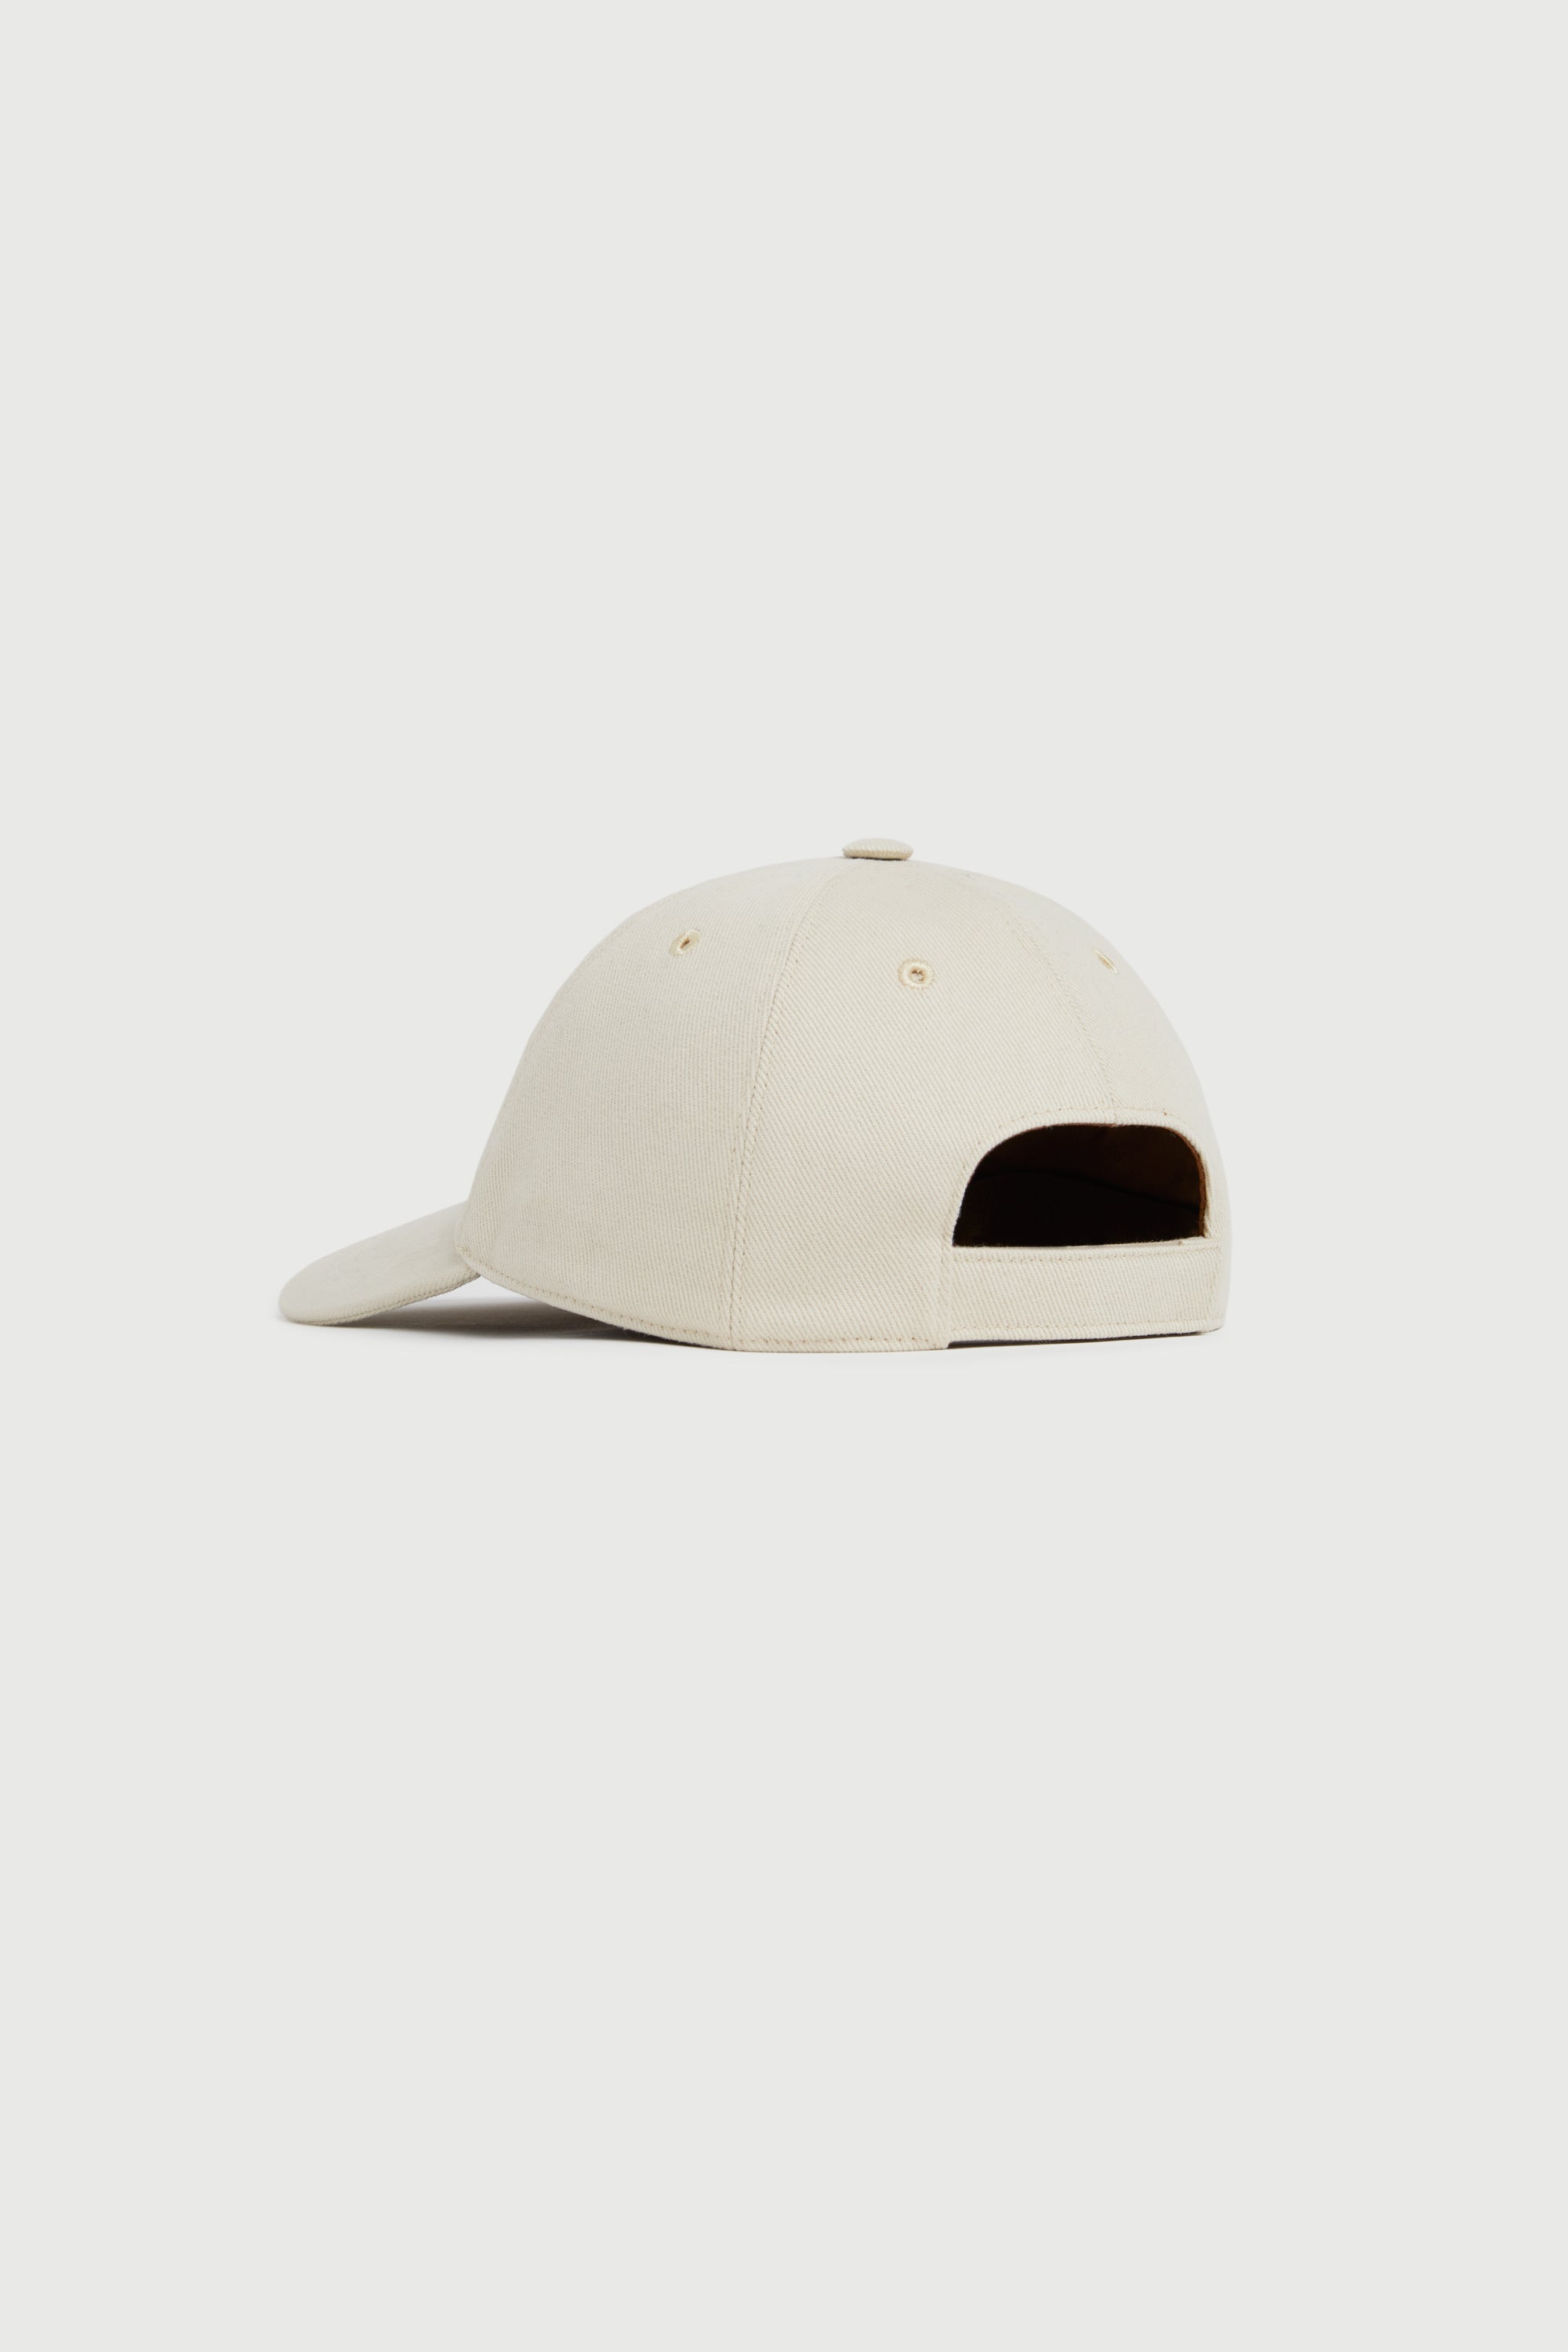 back, The Silk-Lined Baseball Cap in cream, with embroidered logo, Comme Si